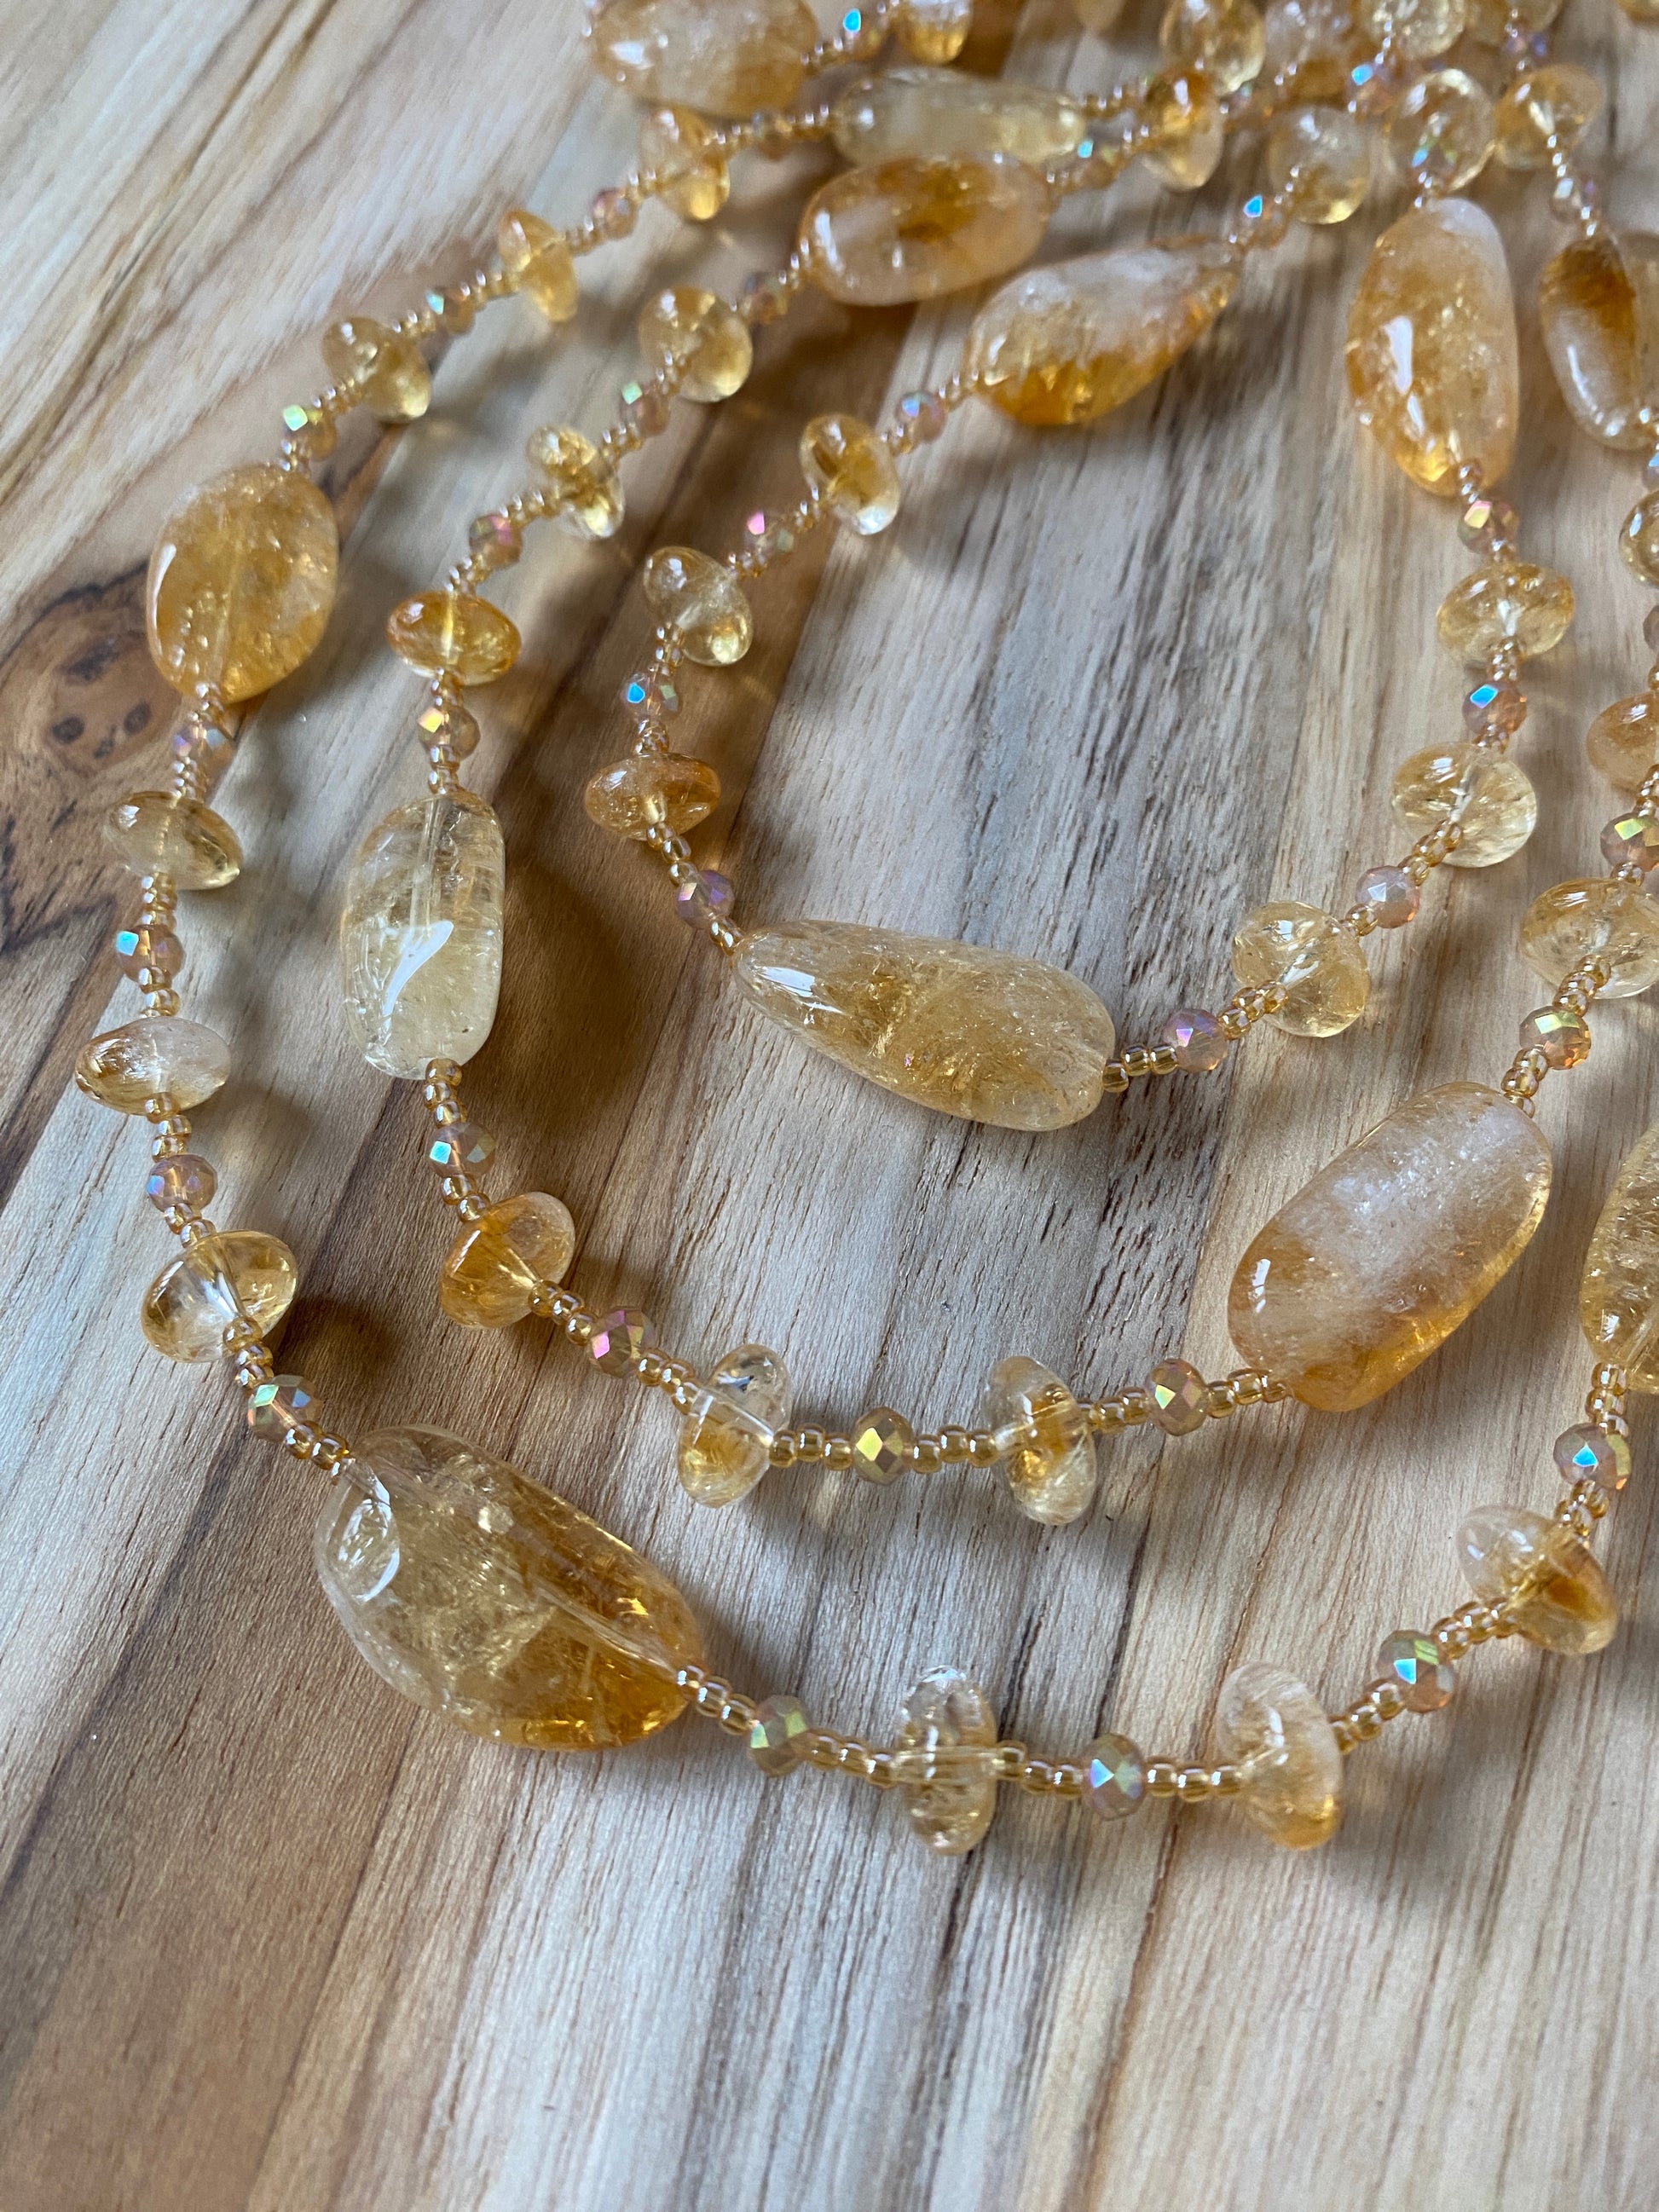 60" Extra Long Beaded Wraparound Necklace with Citrine and Crystal Beads - My Urban Gems